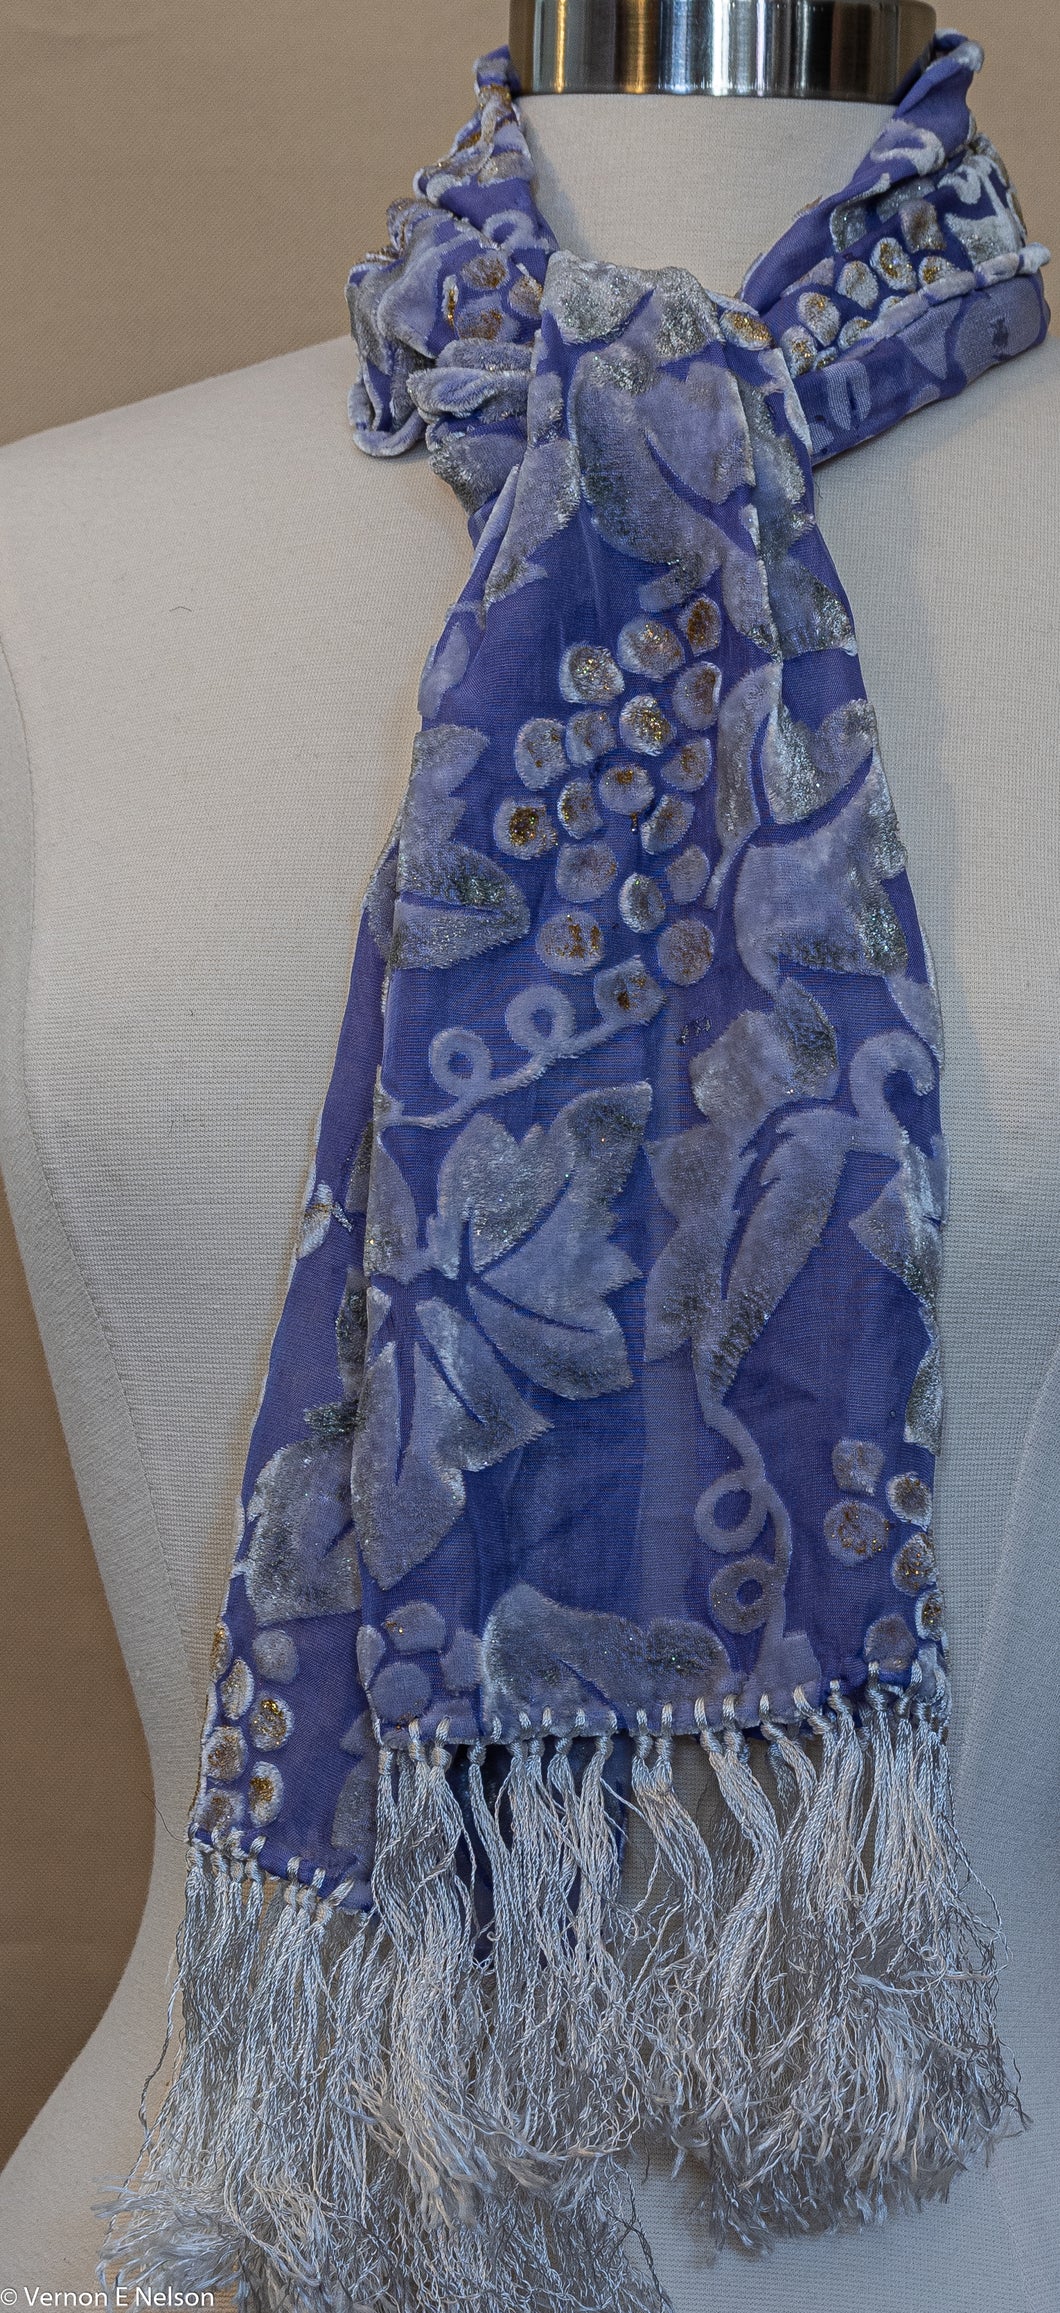 Silk Velvet Scarf  -  Know any Women Who Wine? - Blues/Lilac